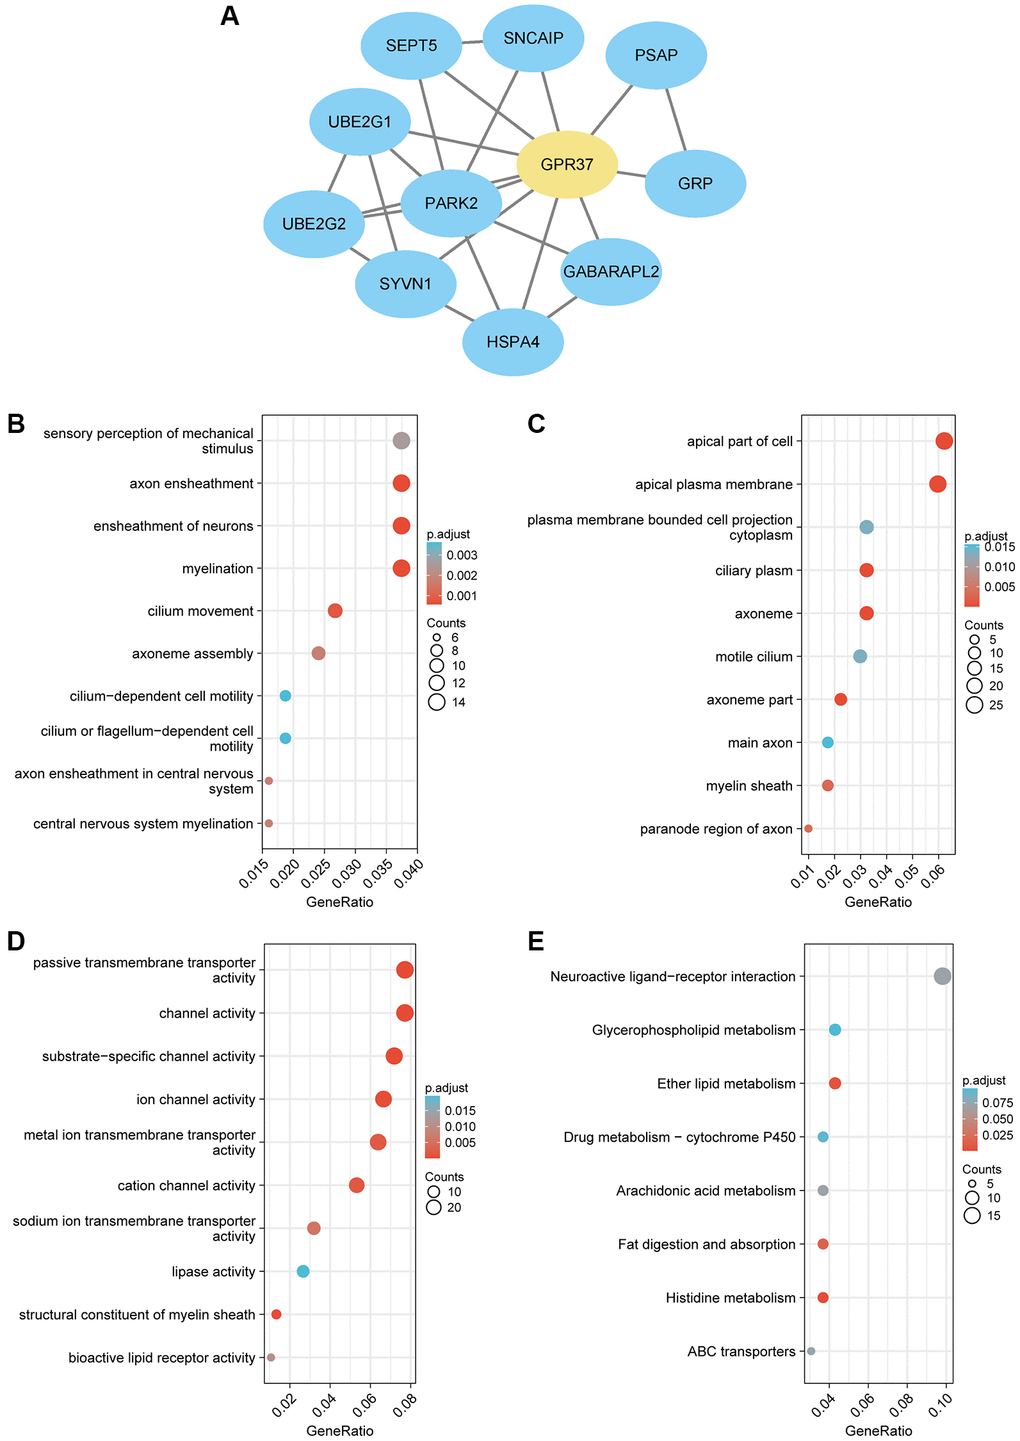 (A) PPI network of GPR37-related genes in glioma. (B–E) Gene set enrichment analysis based on GO analysis including BP, CC and MF terms, and KEGG pathway analysis for all linked hub genes of GPR37 in glioma.